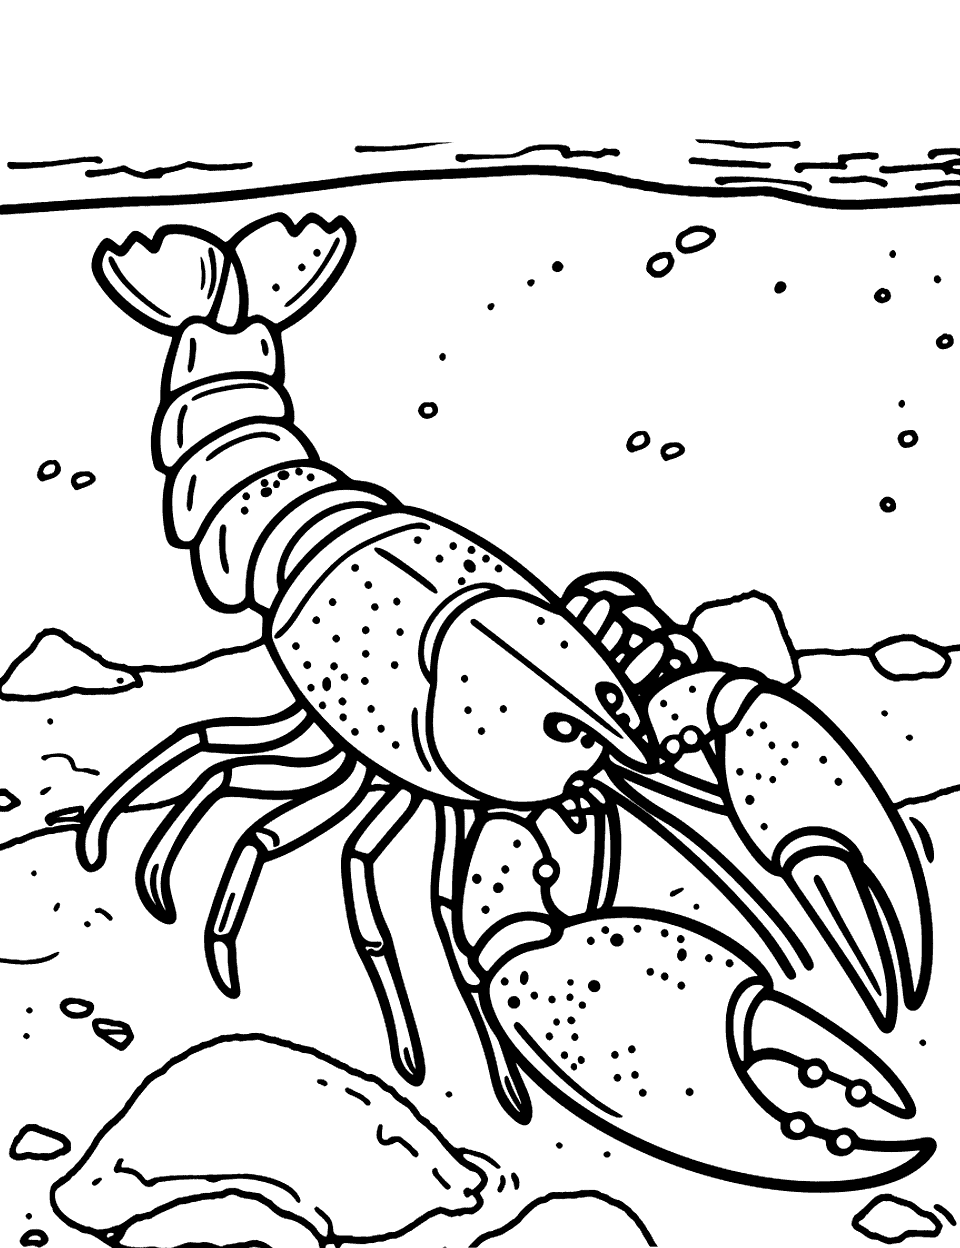 Lobster Crawling on Rocks Sea Creature Coloring Page - A lobster moves slowly over rocks, its claws and antennae stretched forward.